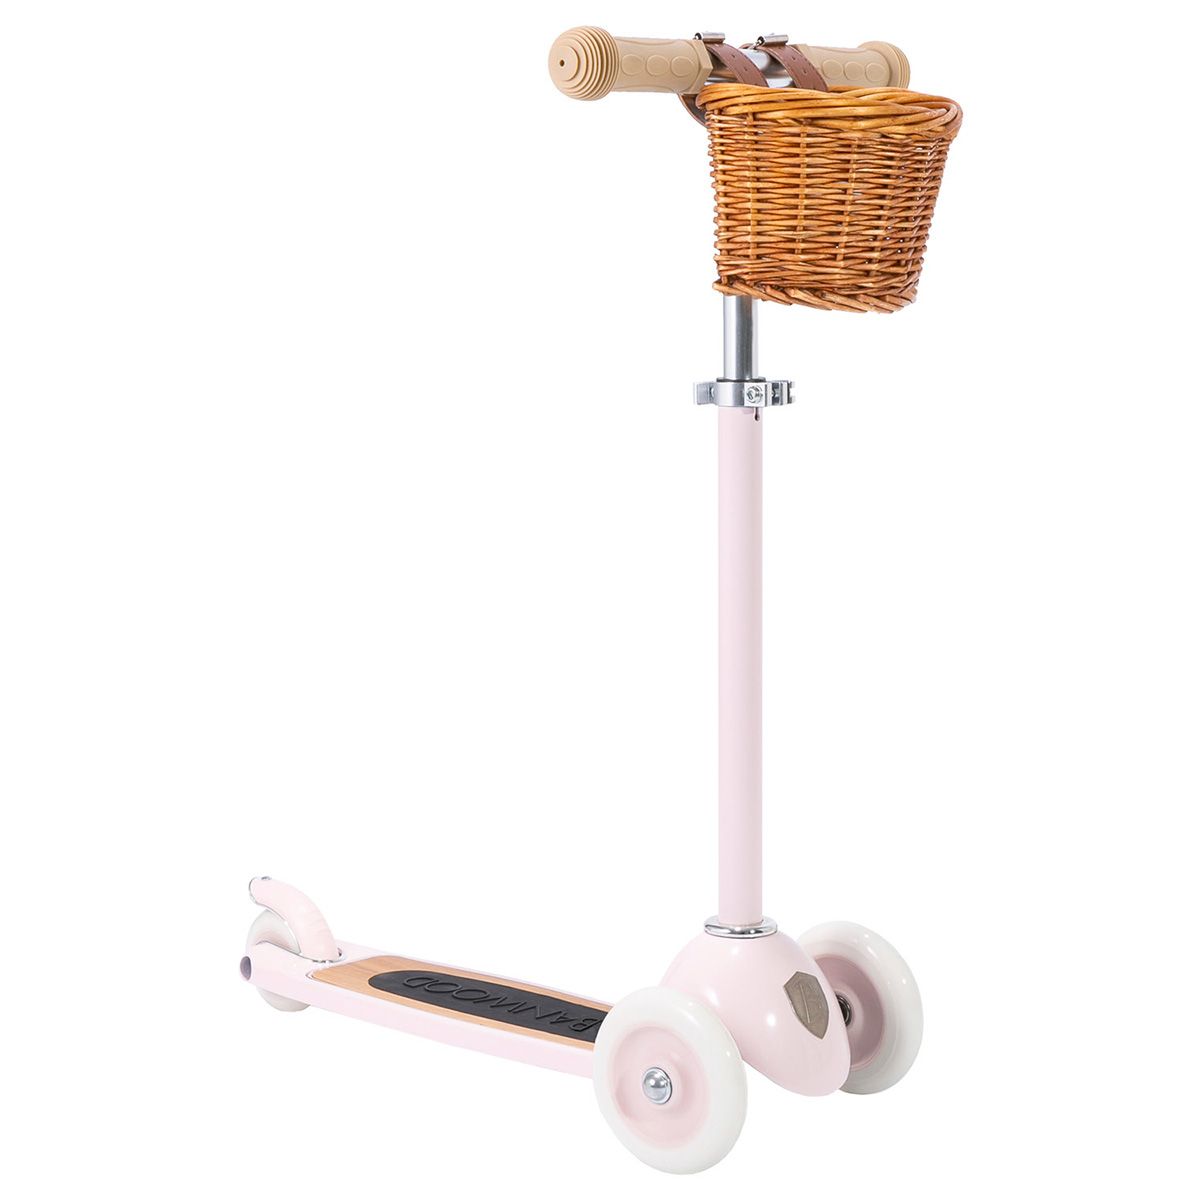 Banwood Bikes Scooter | The Tot